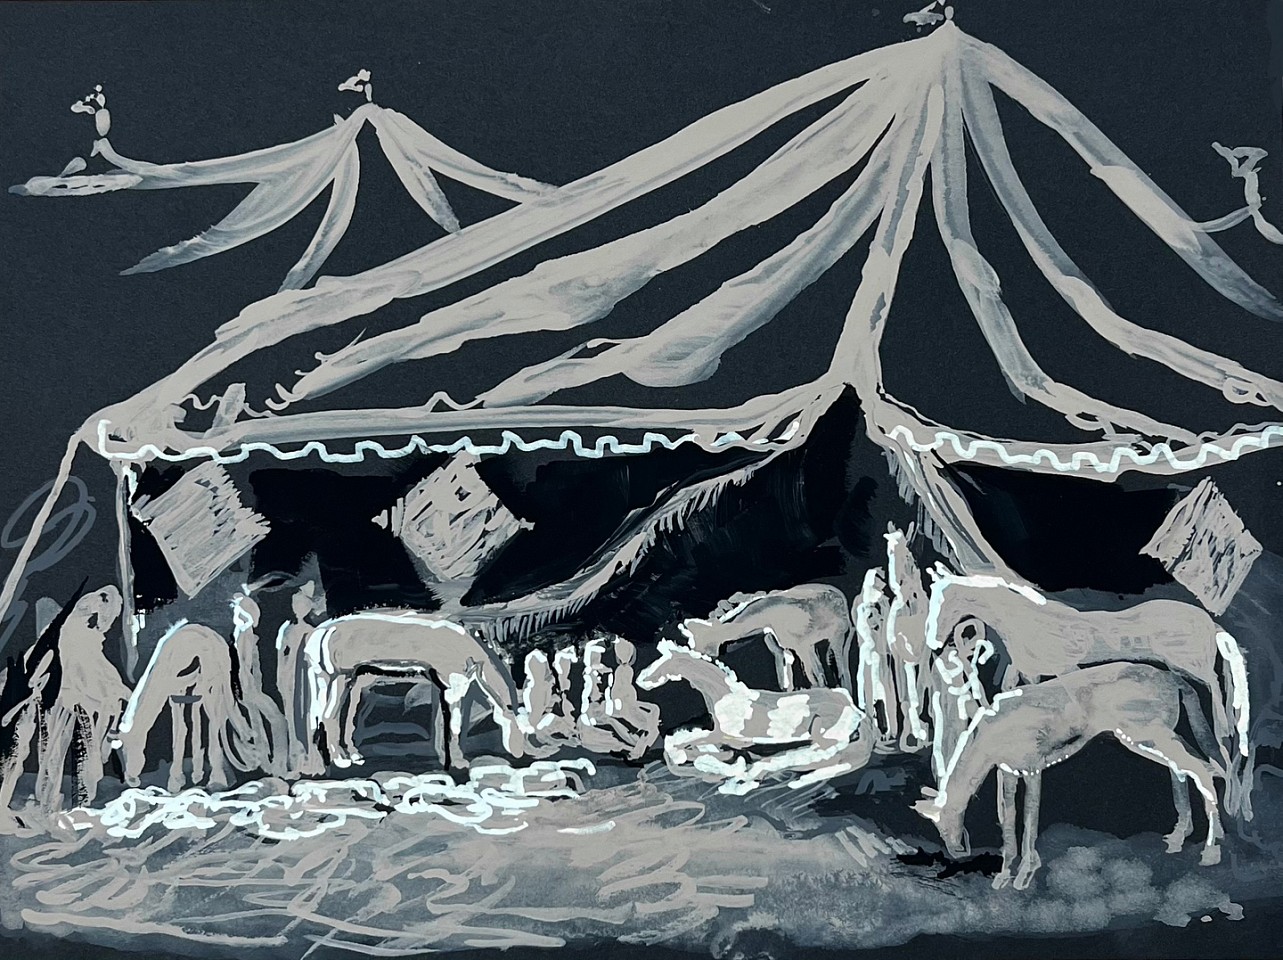 Suzy Spence
Untitled (women, horses, carnival tent), 2023
SPENC342
acrylic on paper, 9 x 12 inches